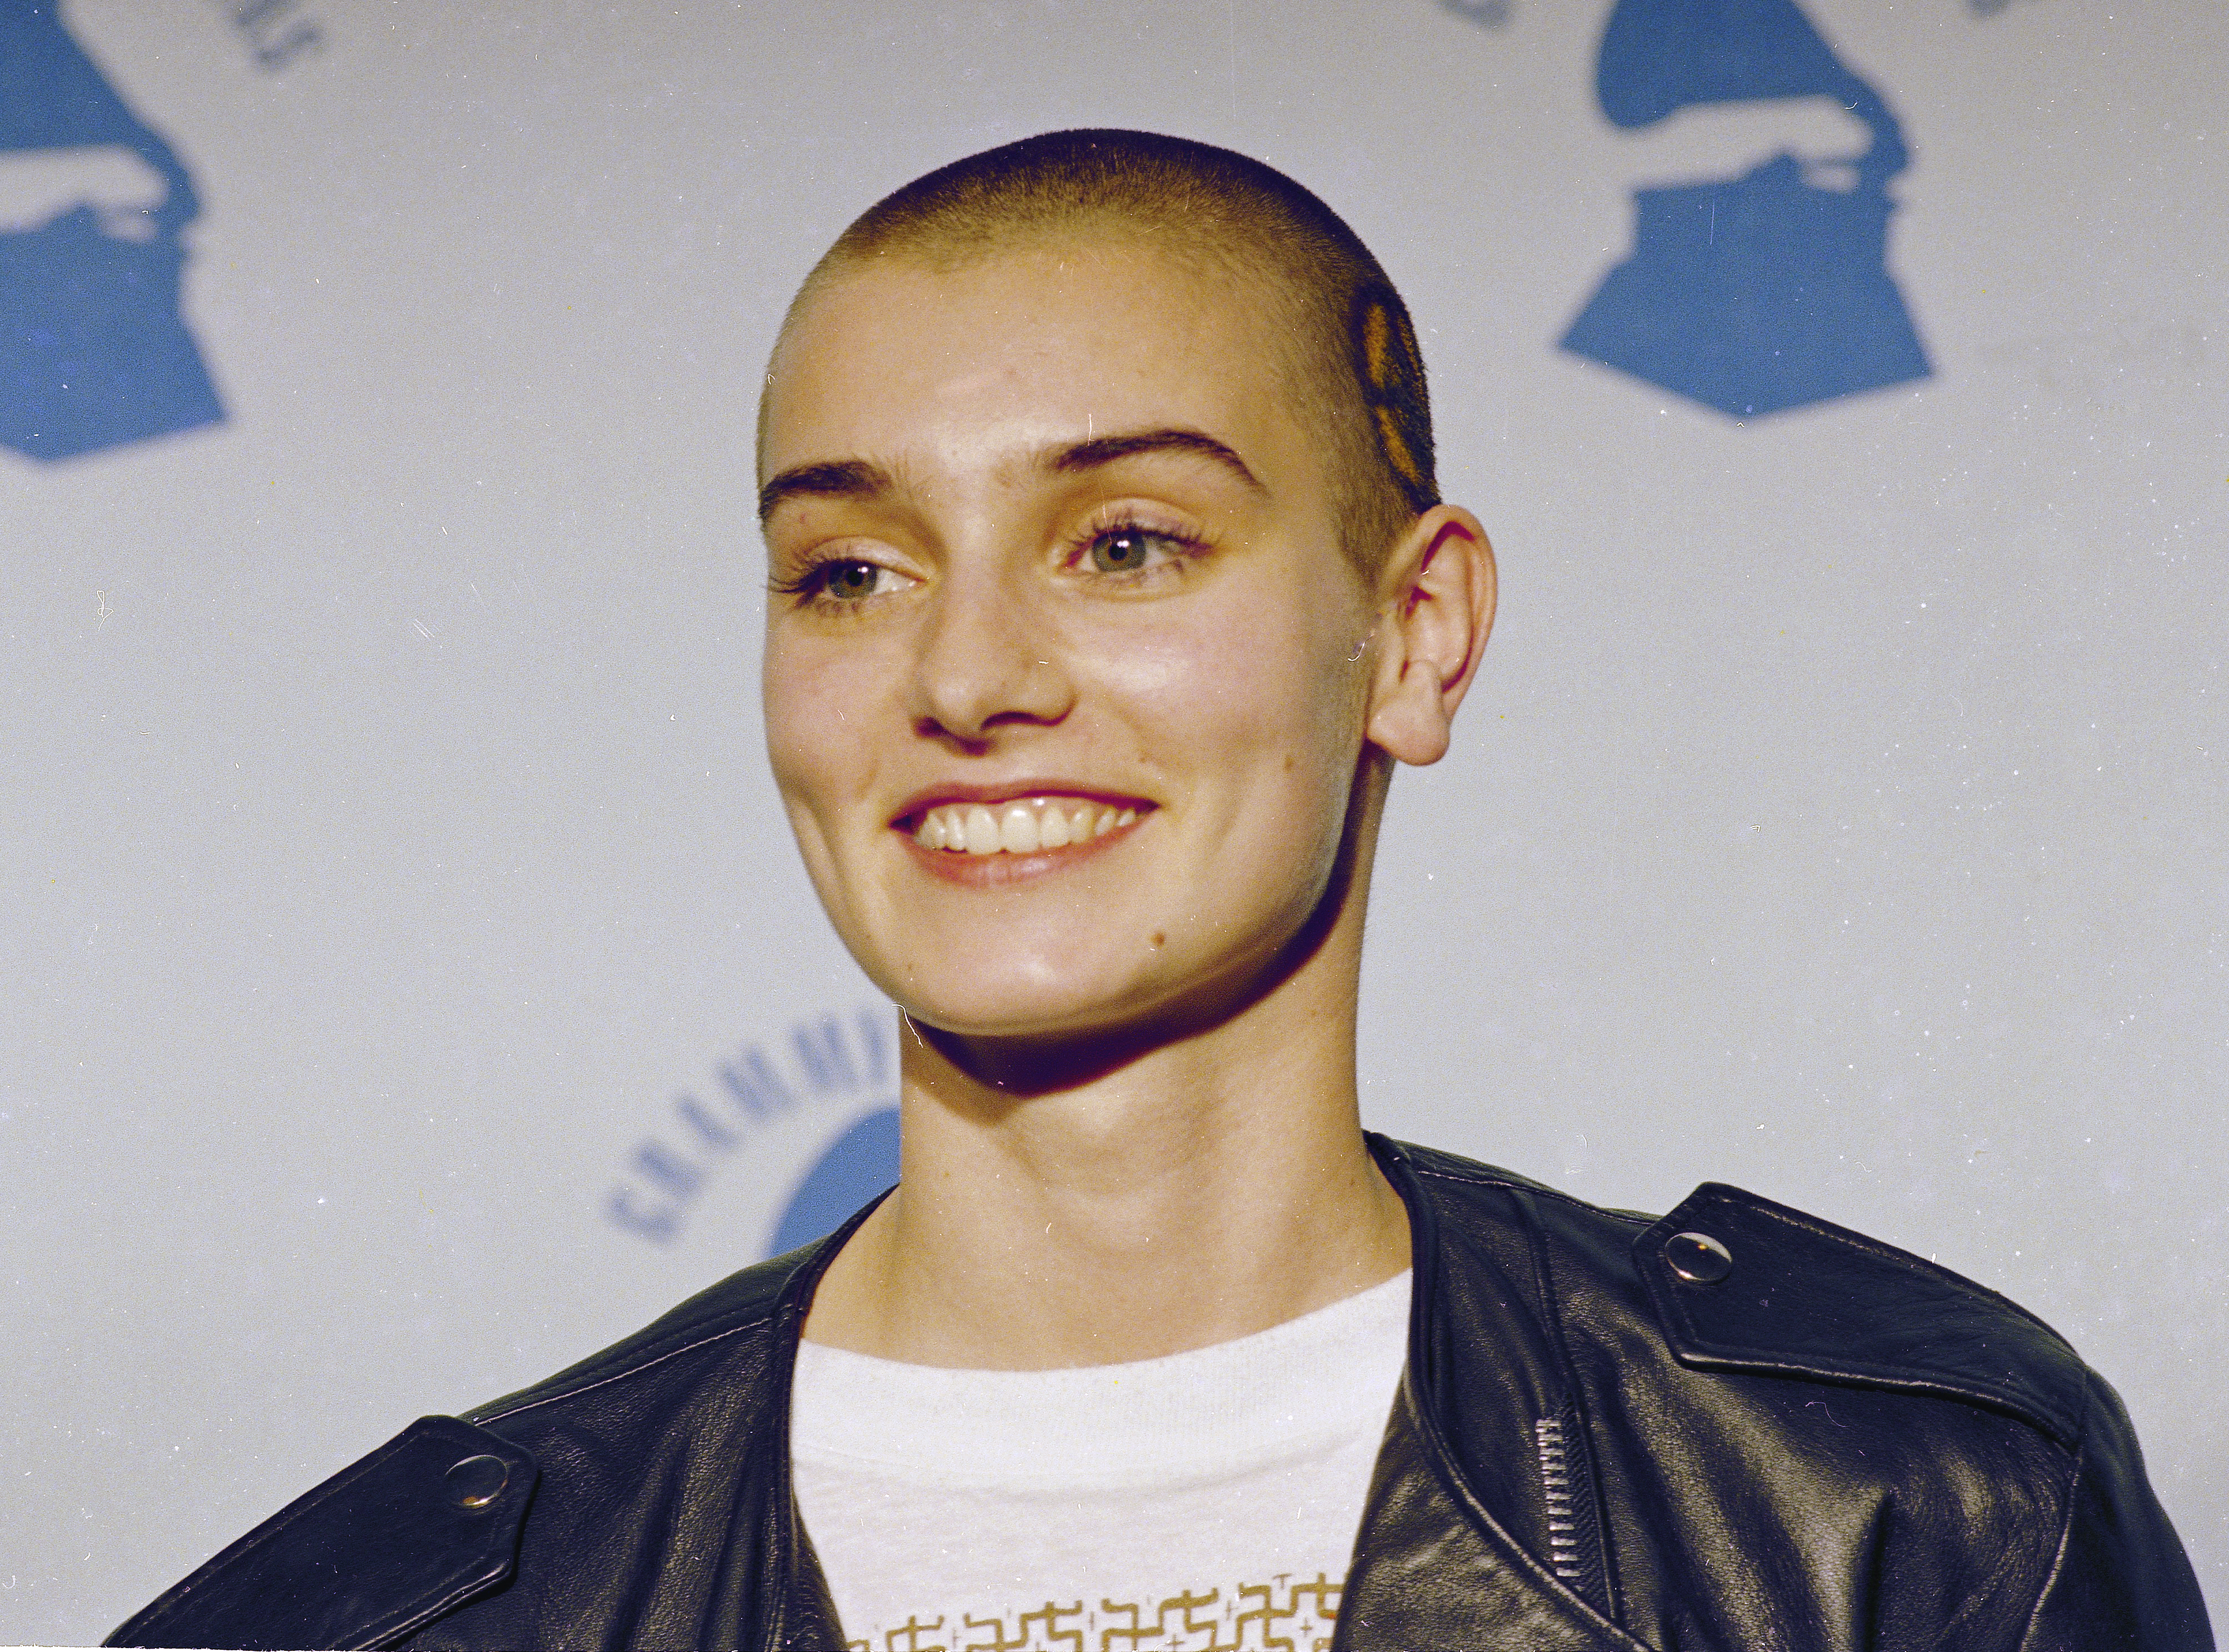 Sinéad OConnor, gifted and provocative Irish singer, dies at 56